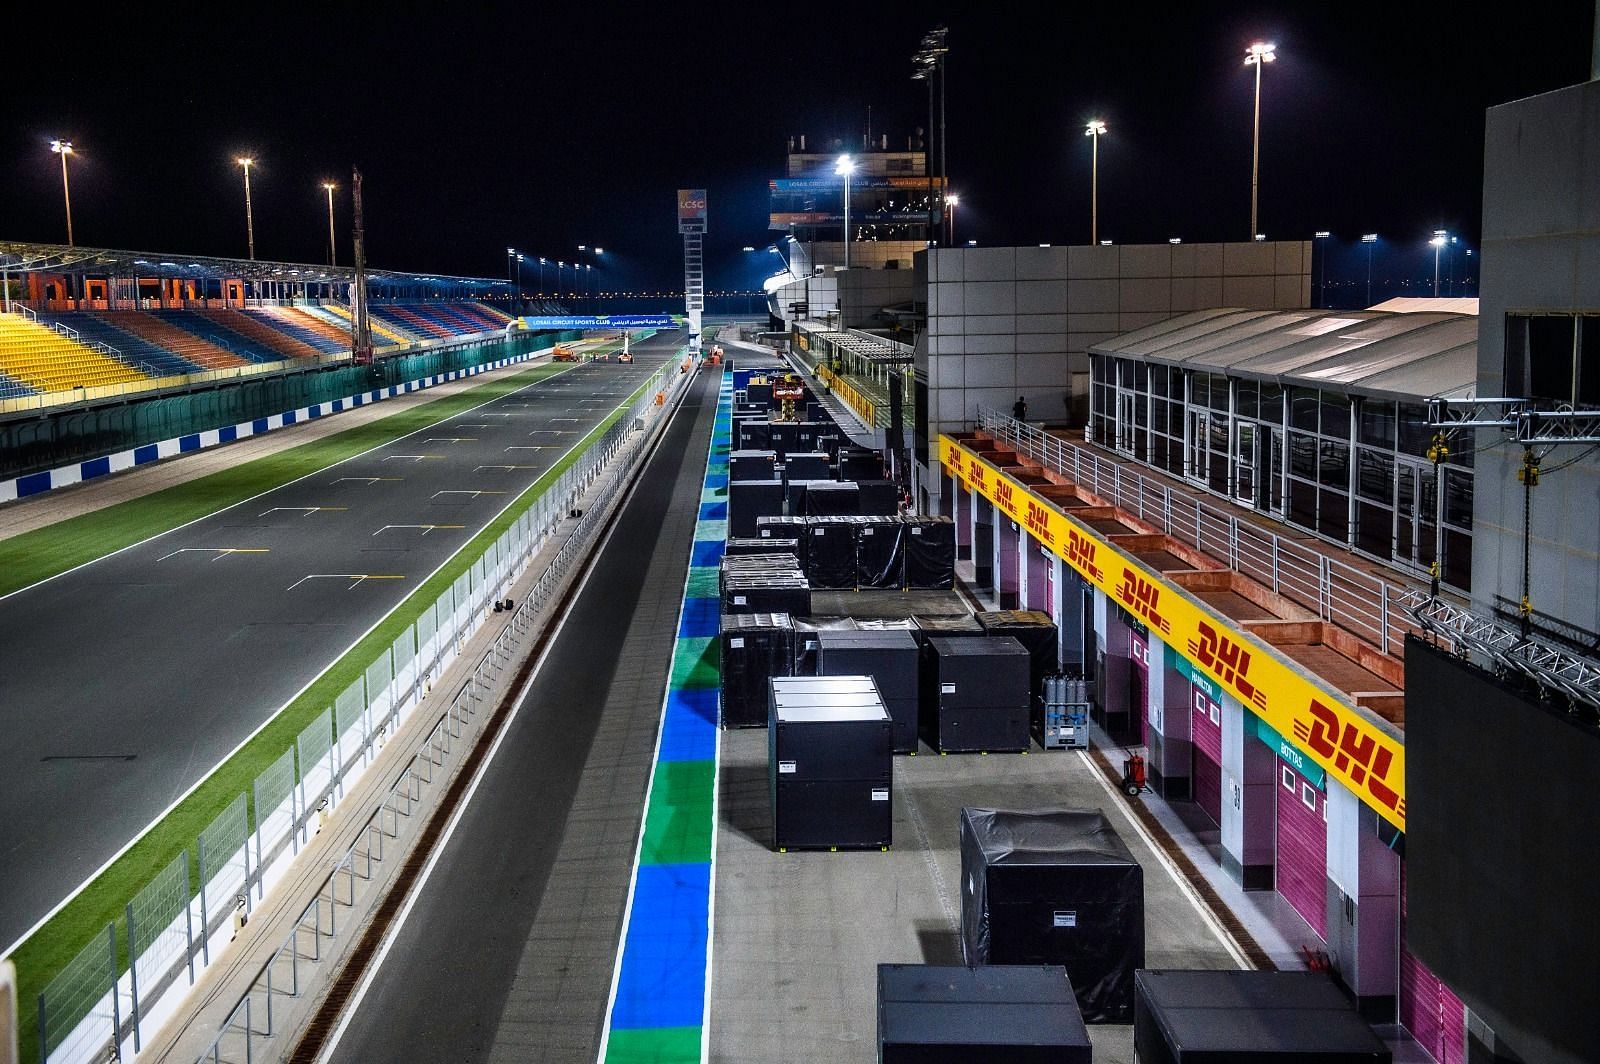 The Losail International Circuit is prepared to host its first F1 race, the Qatar Grand Prix 2021 (Photo Courtesy: Losail Circuit Sports Club)